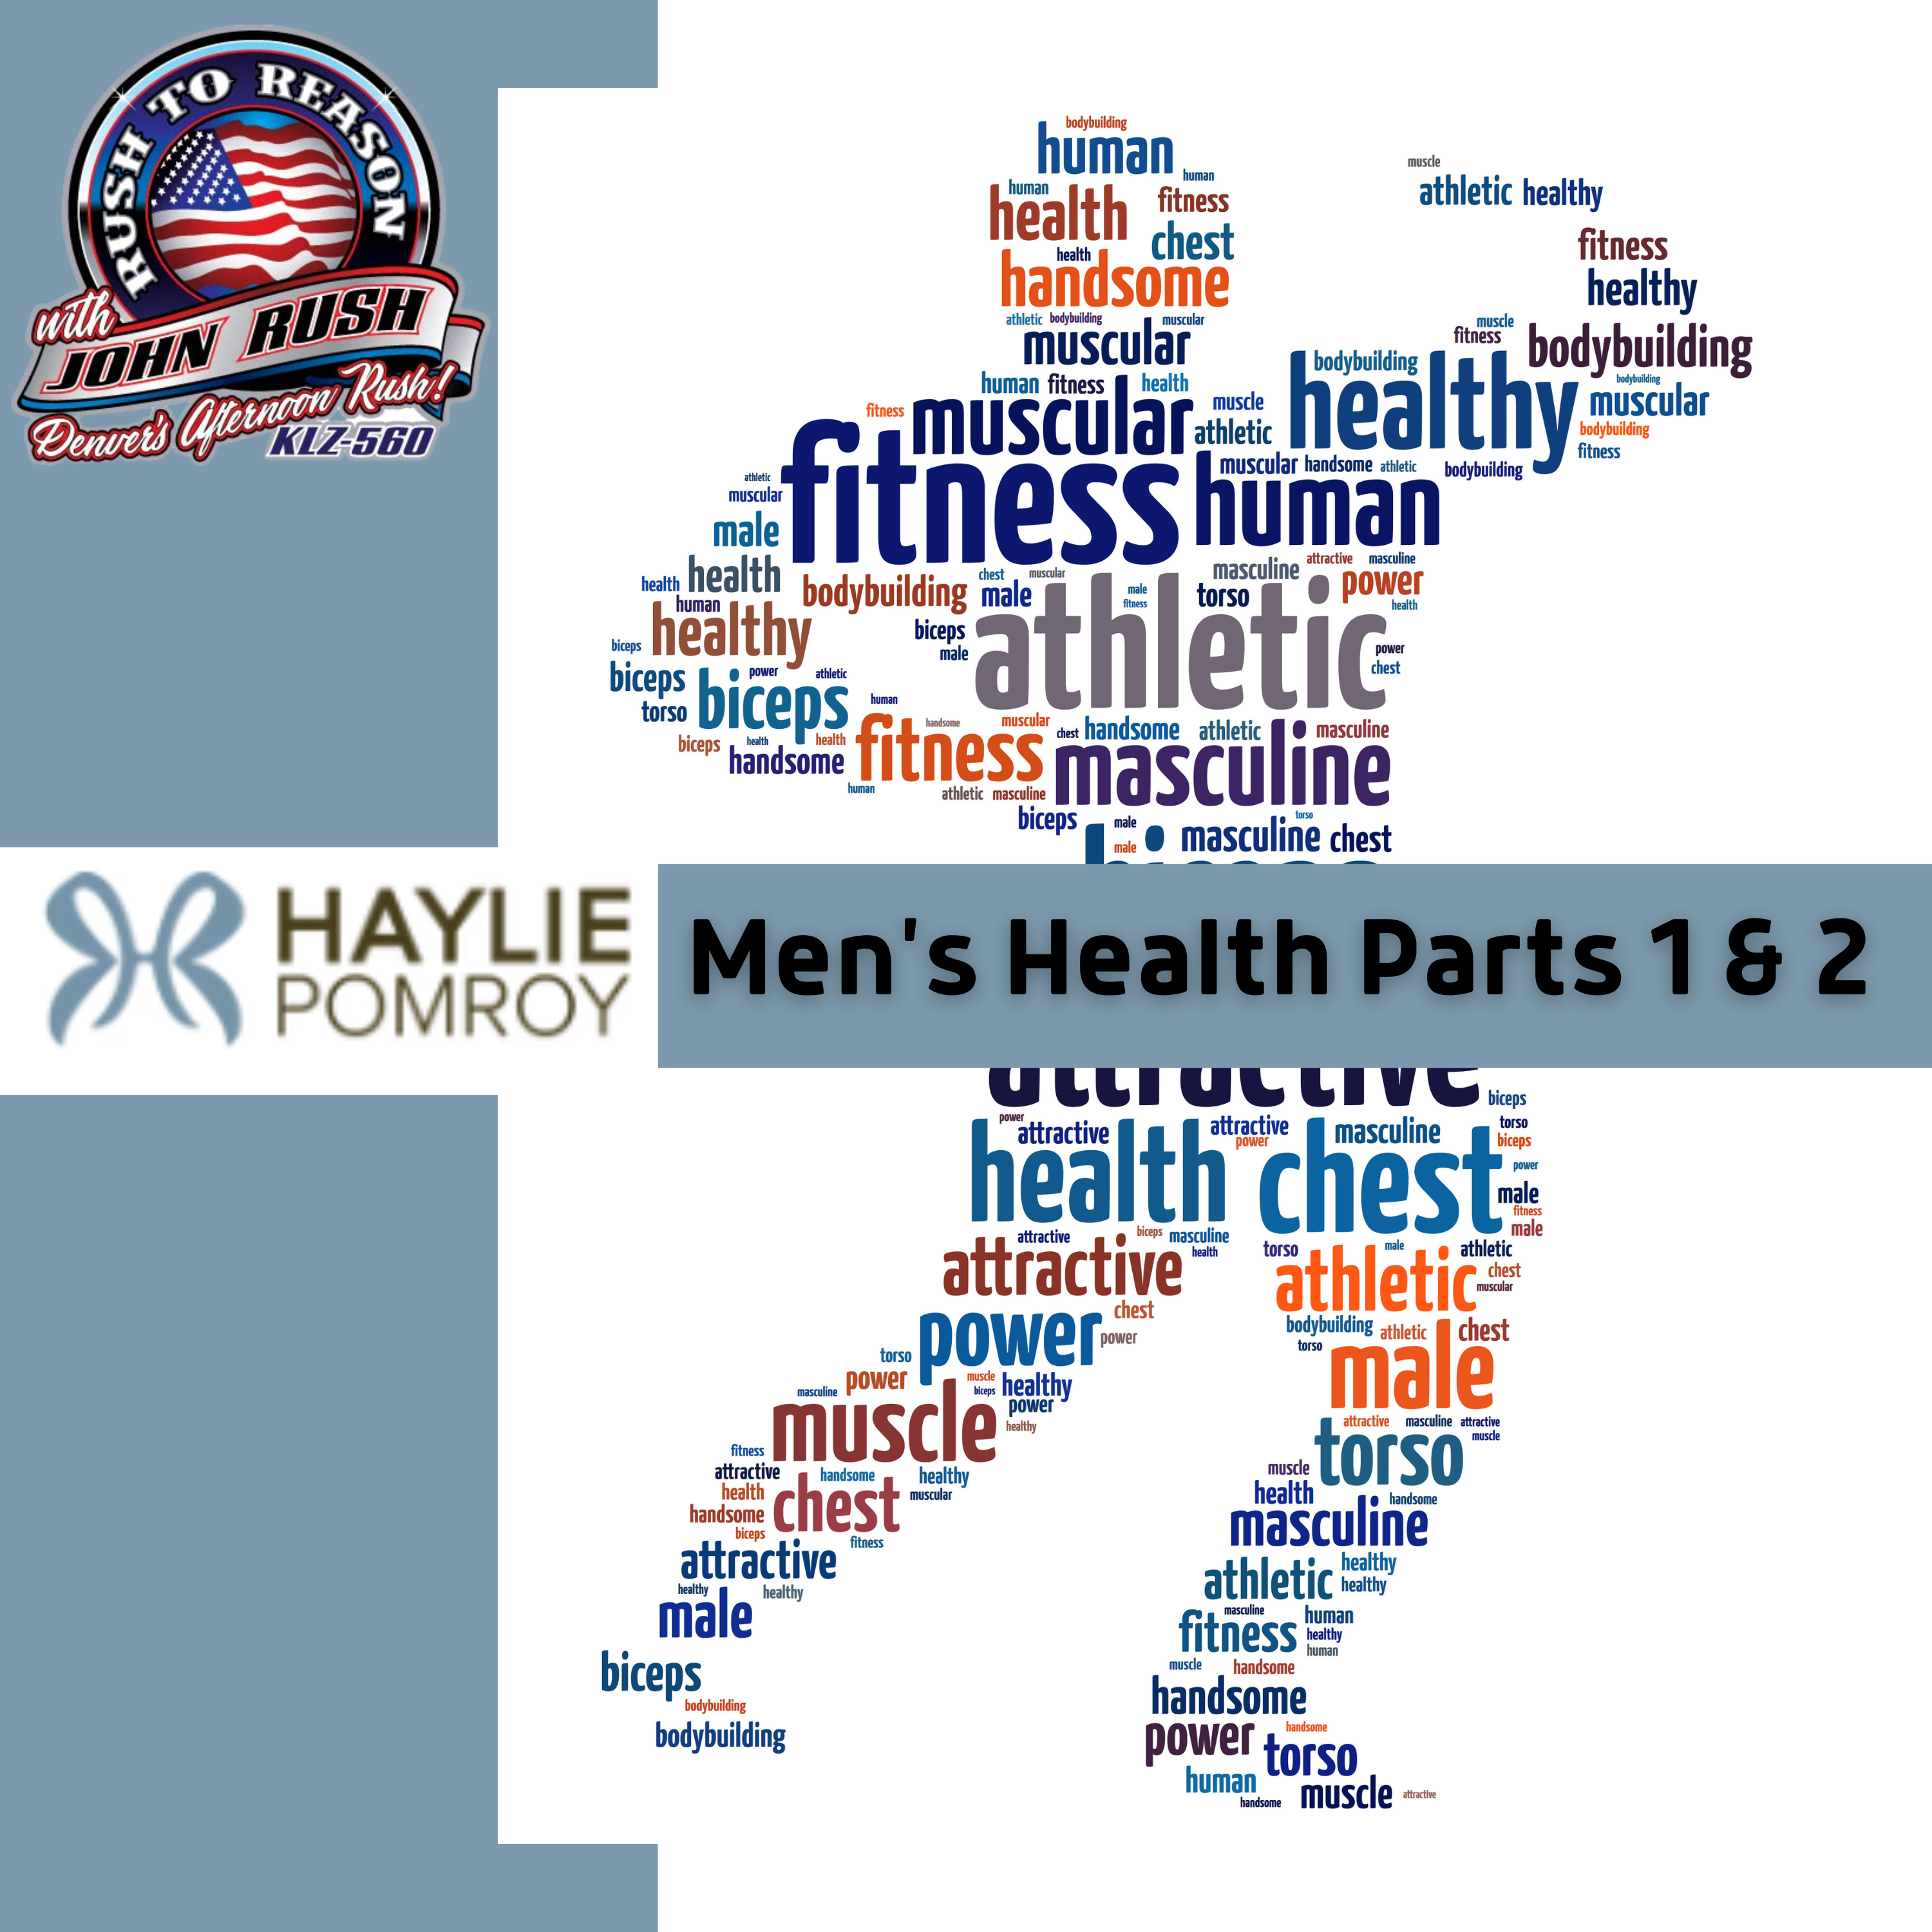 Haylie Pomroy:  Men's Health Parts 1 and 2